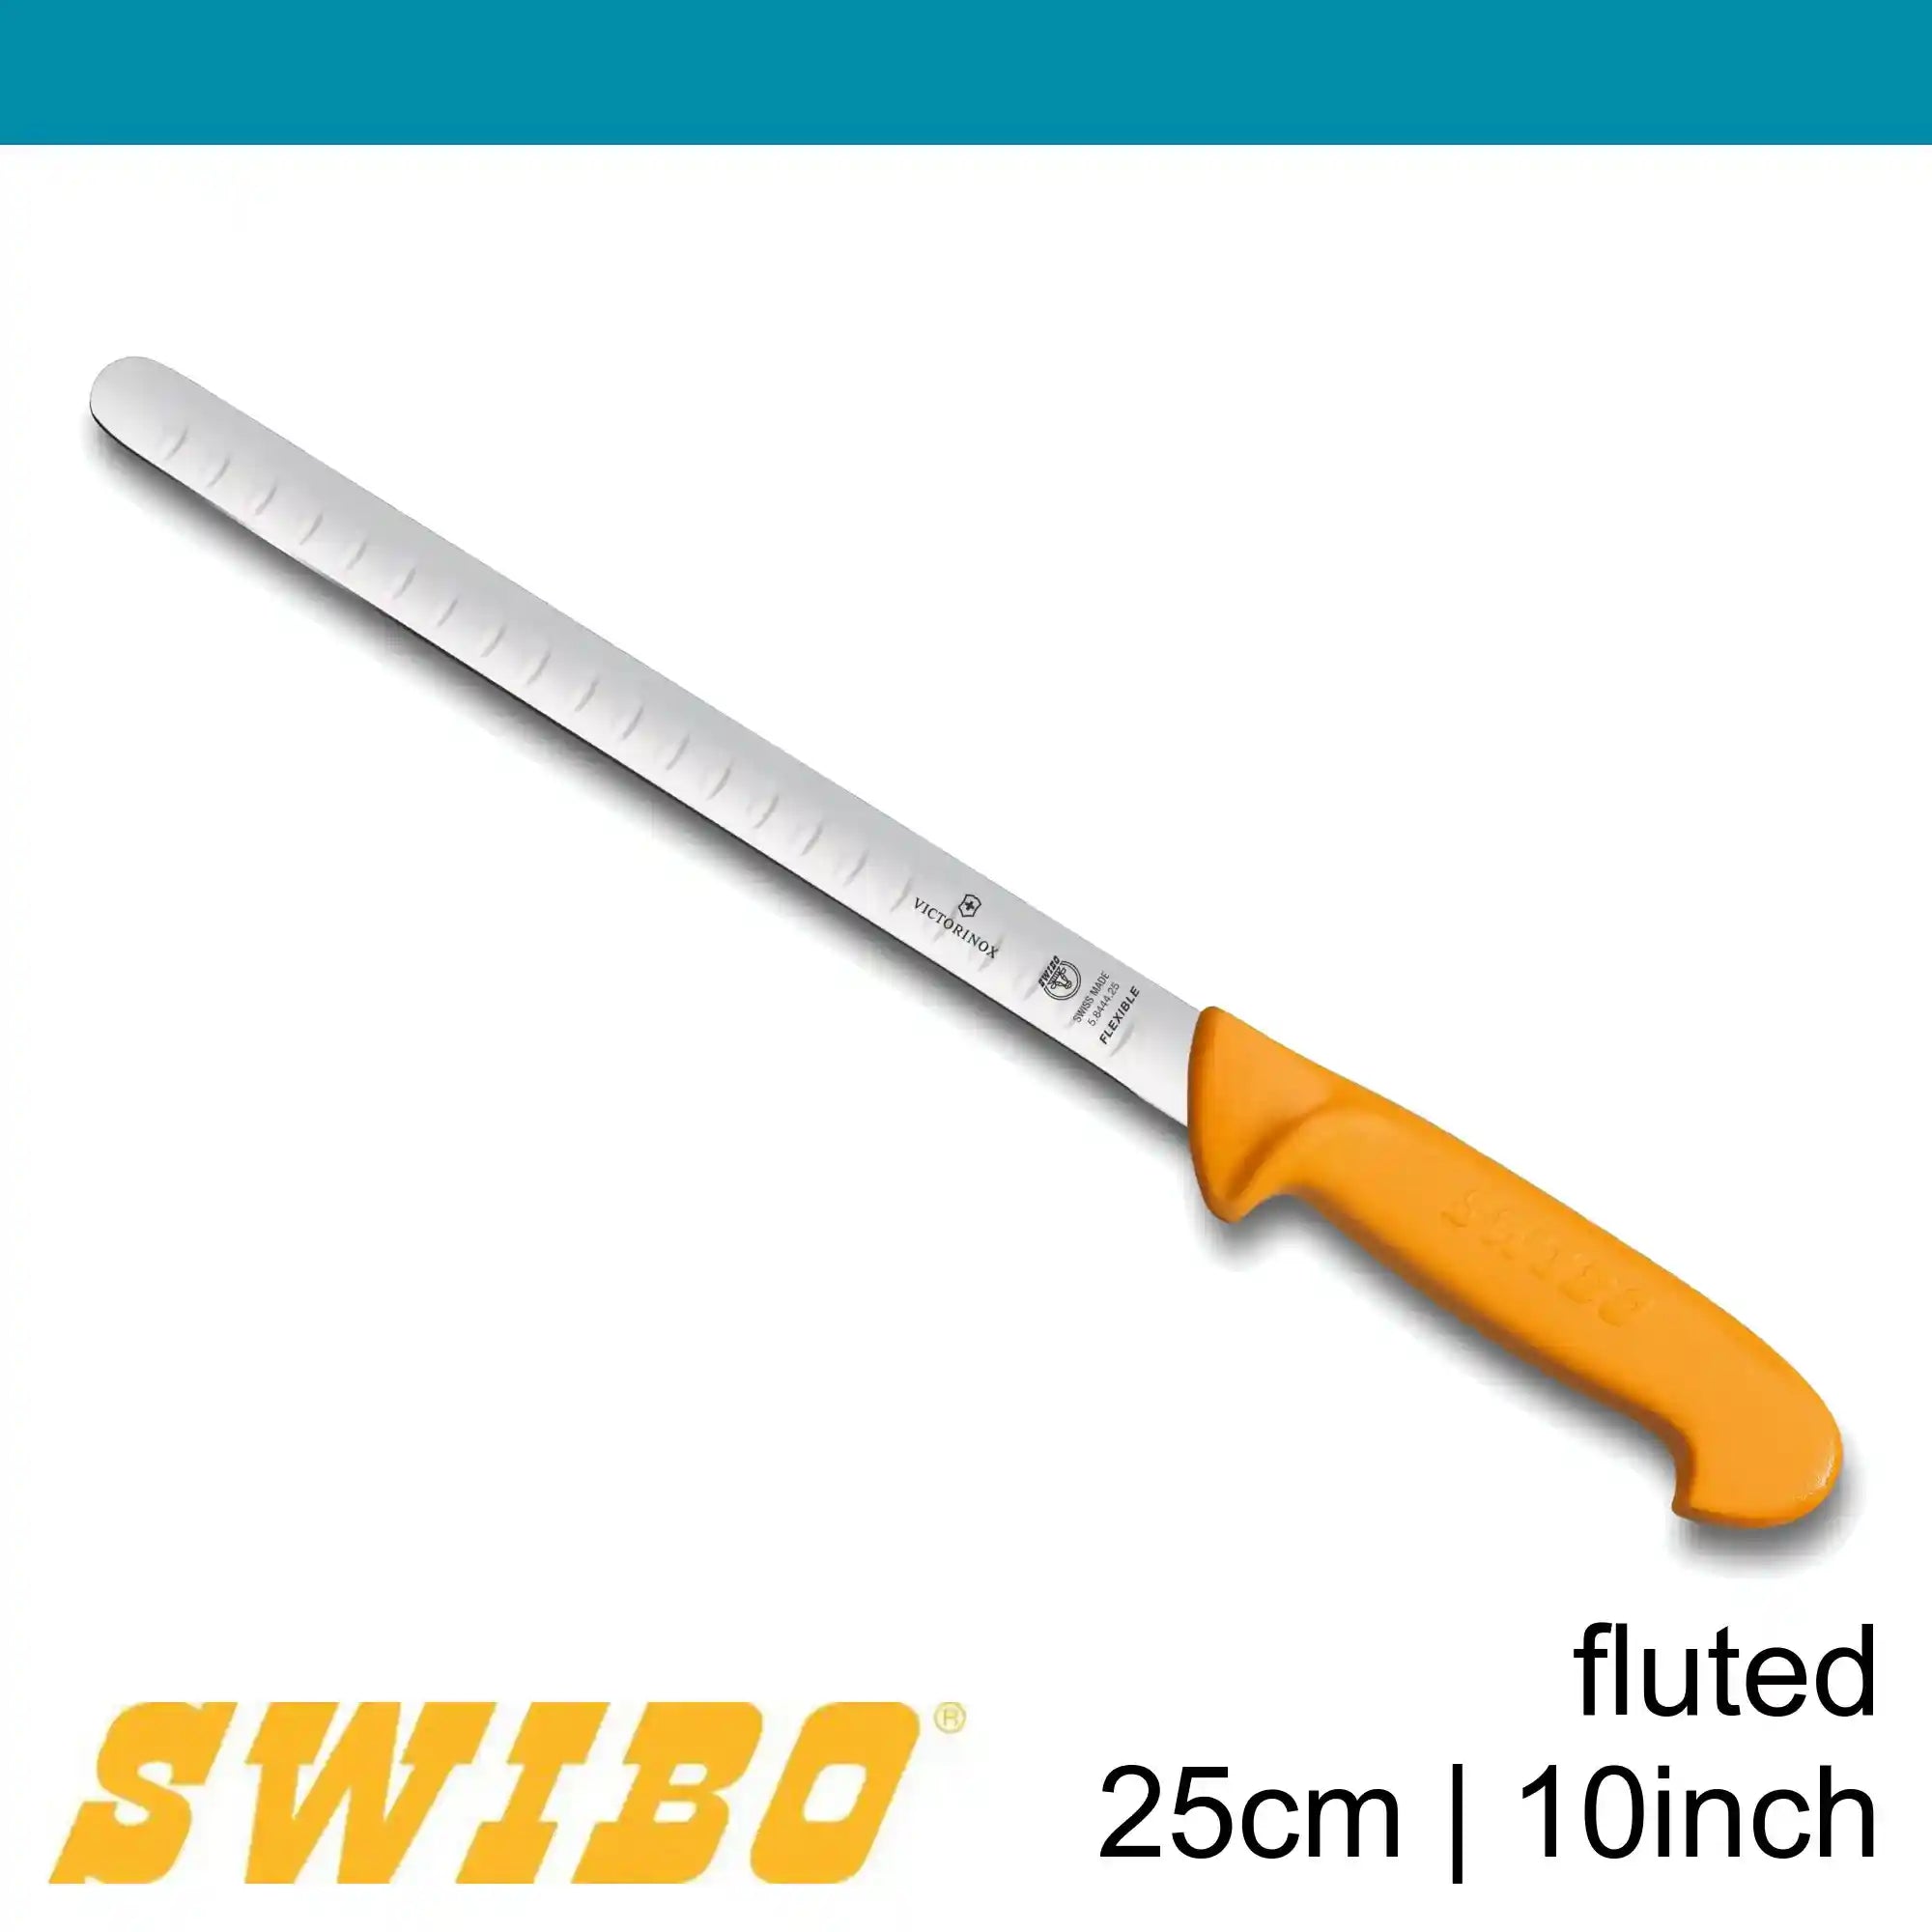 Swibo Salmon Fluted Knife, Round Tip 25 cm